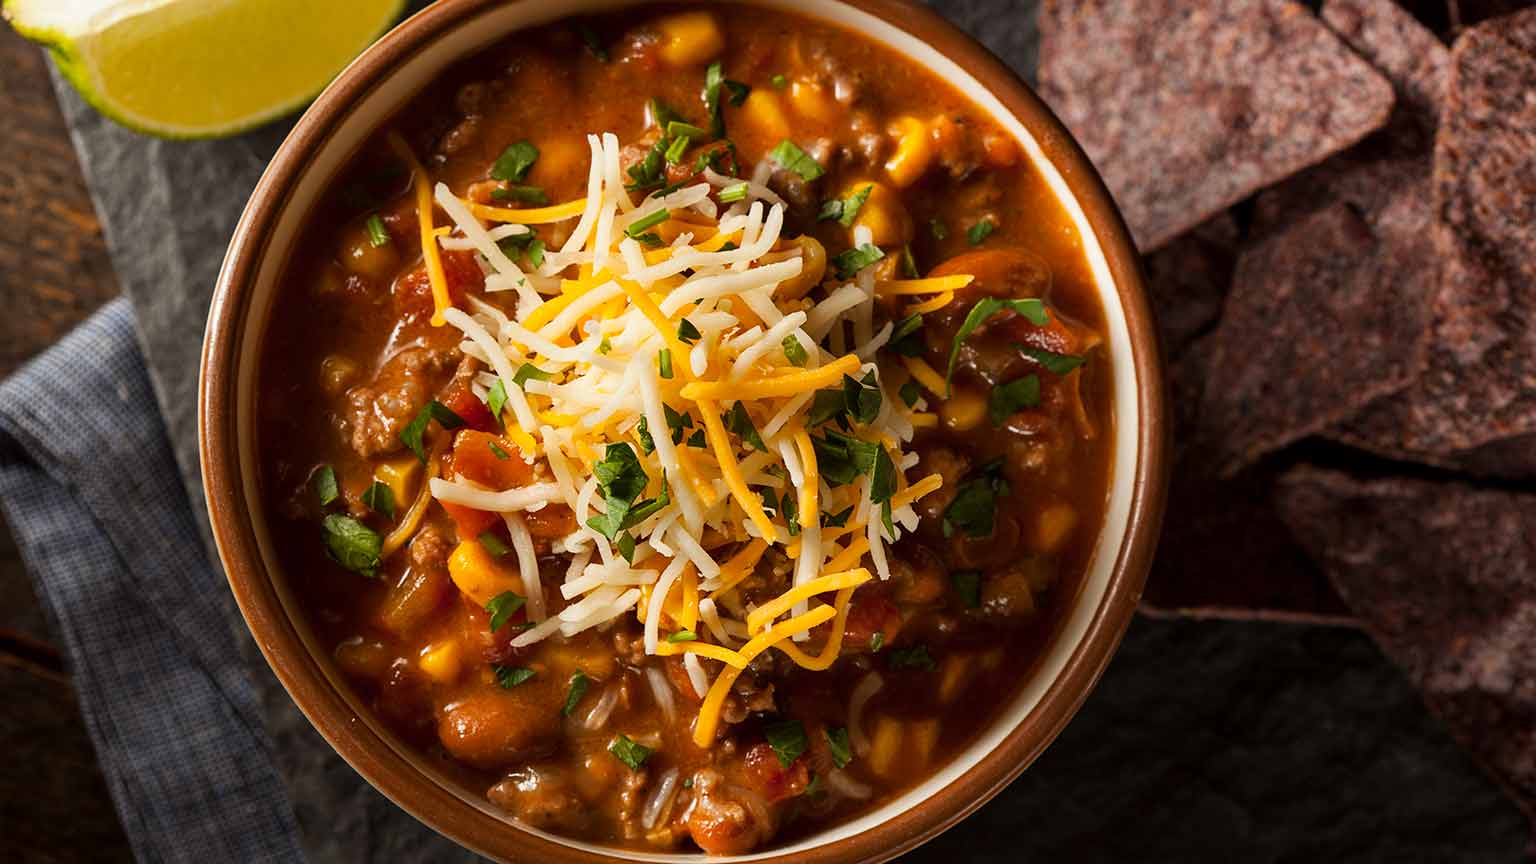 A bowl of chili topped with shredded cheese